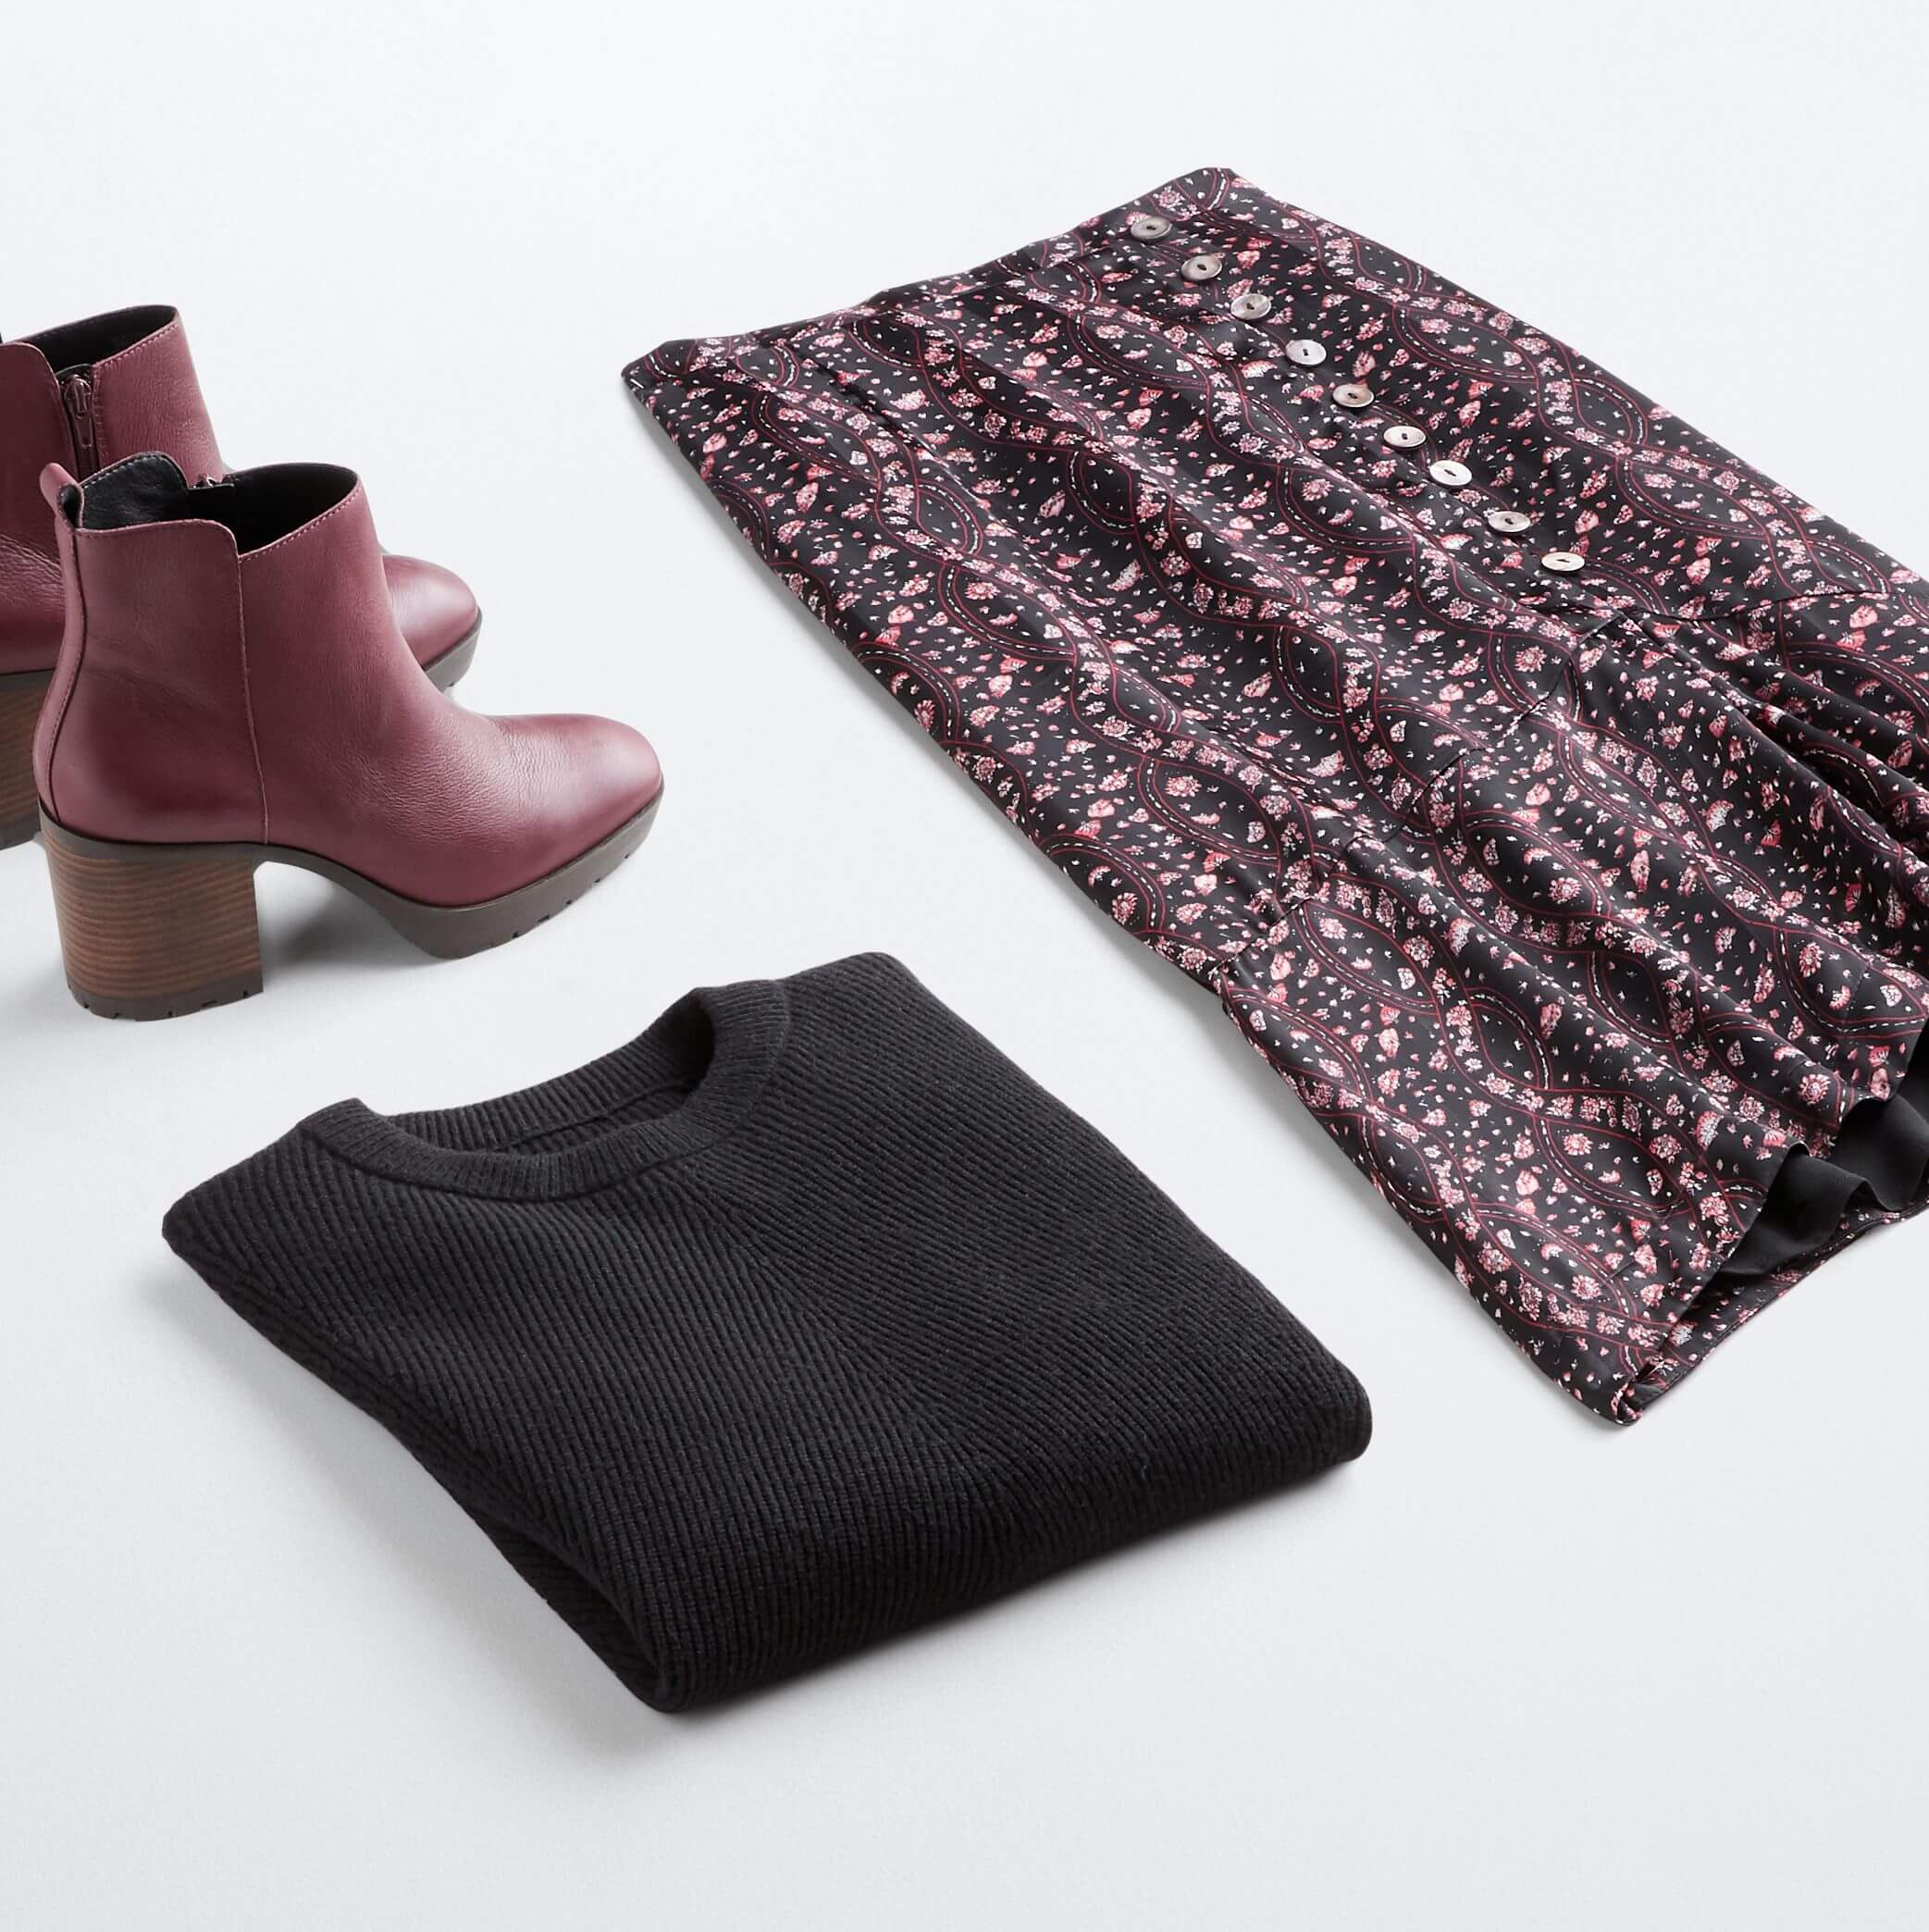 Stitch Fix Women's outfit laydown featuring purple floral skirt, black pullover sweater and purple heeled booties.